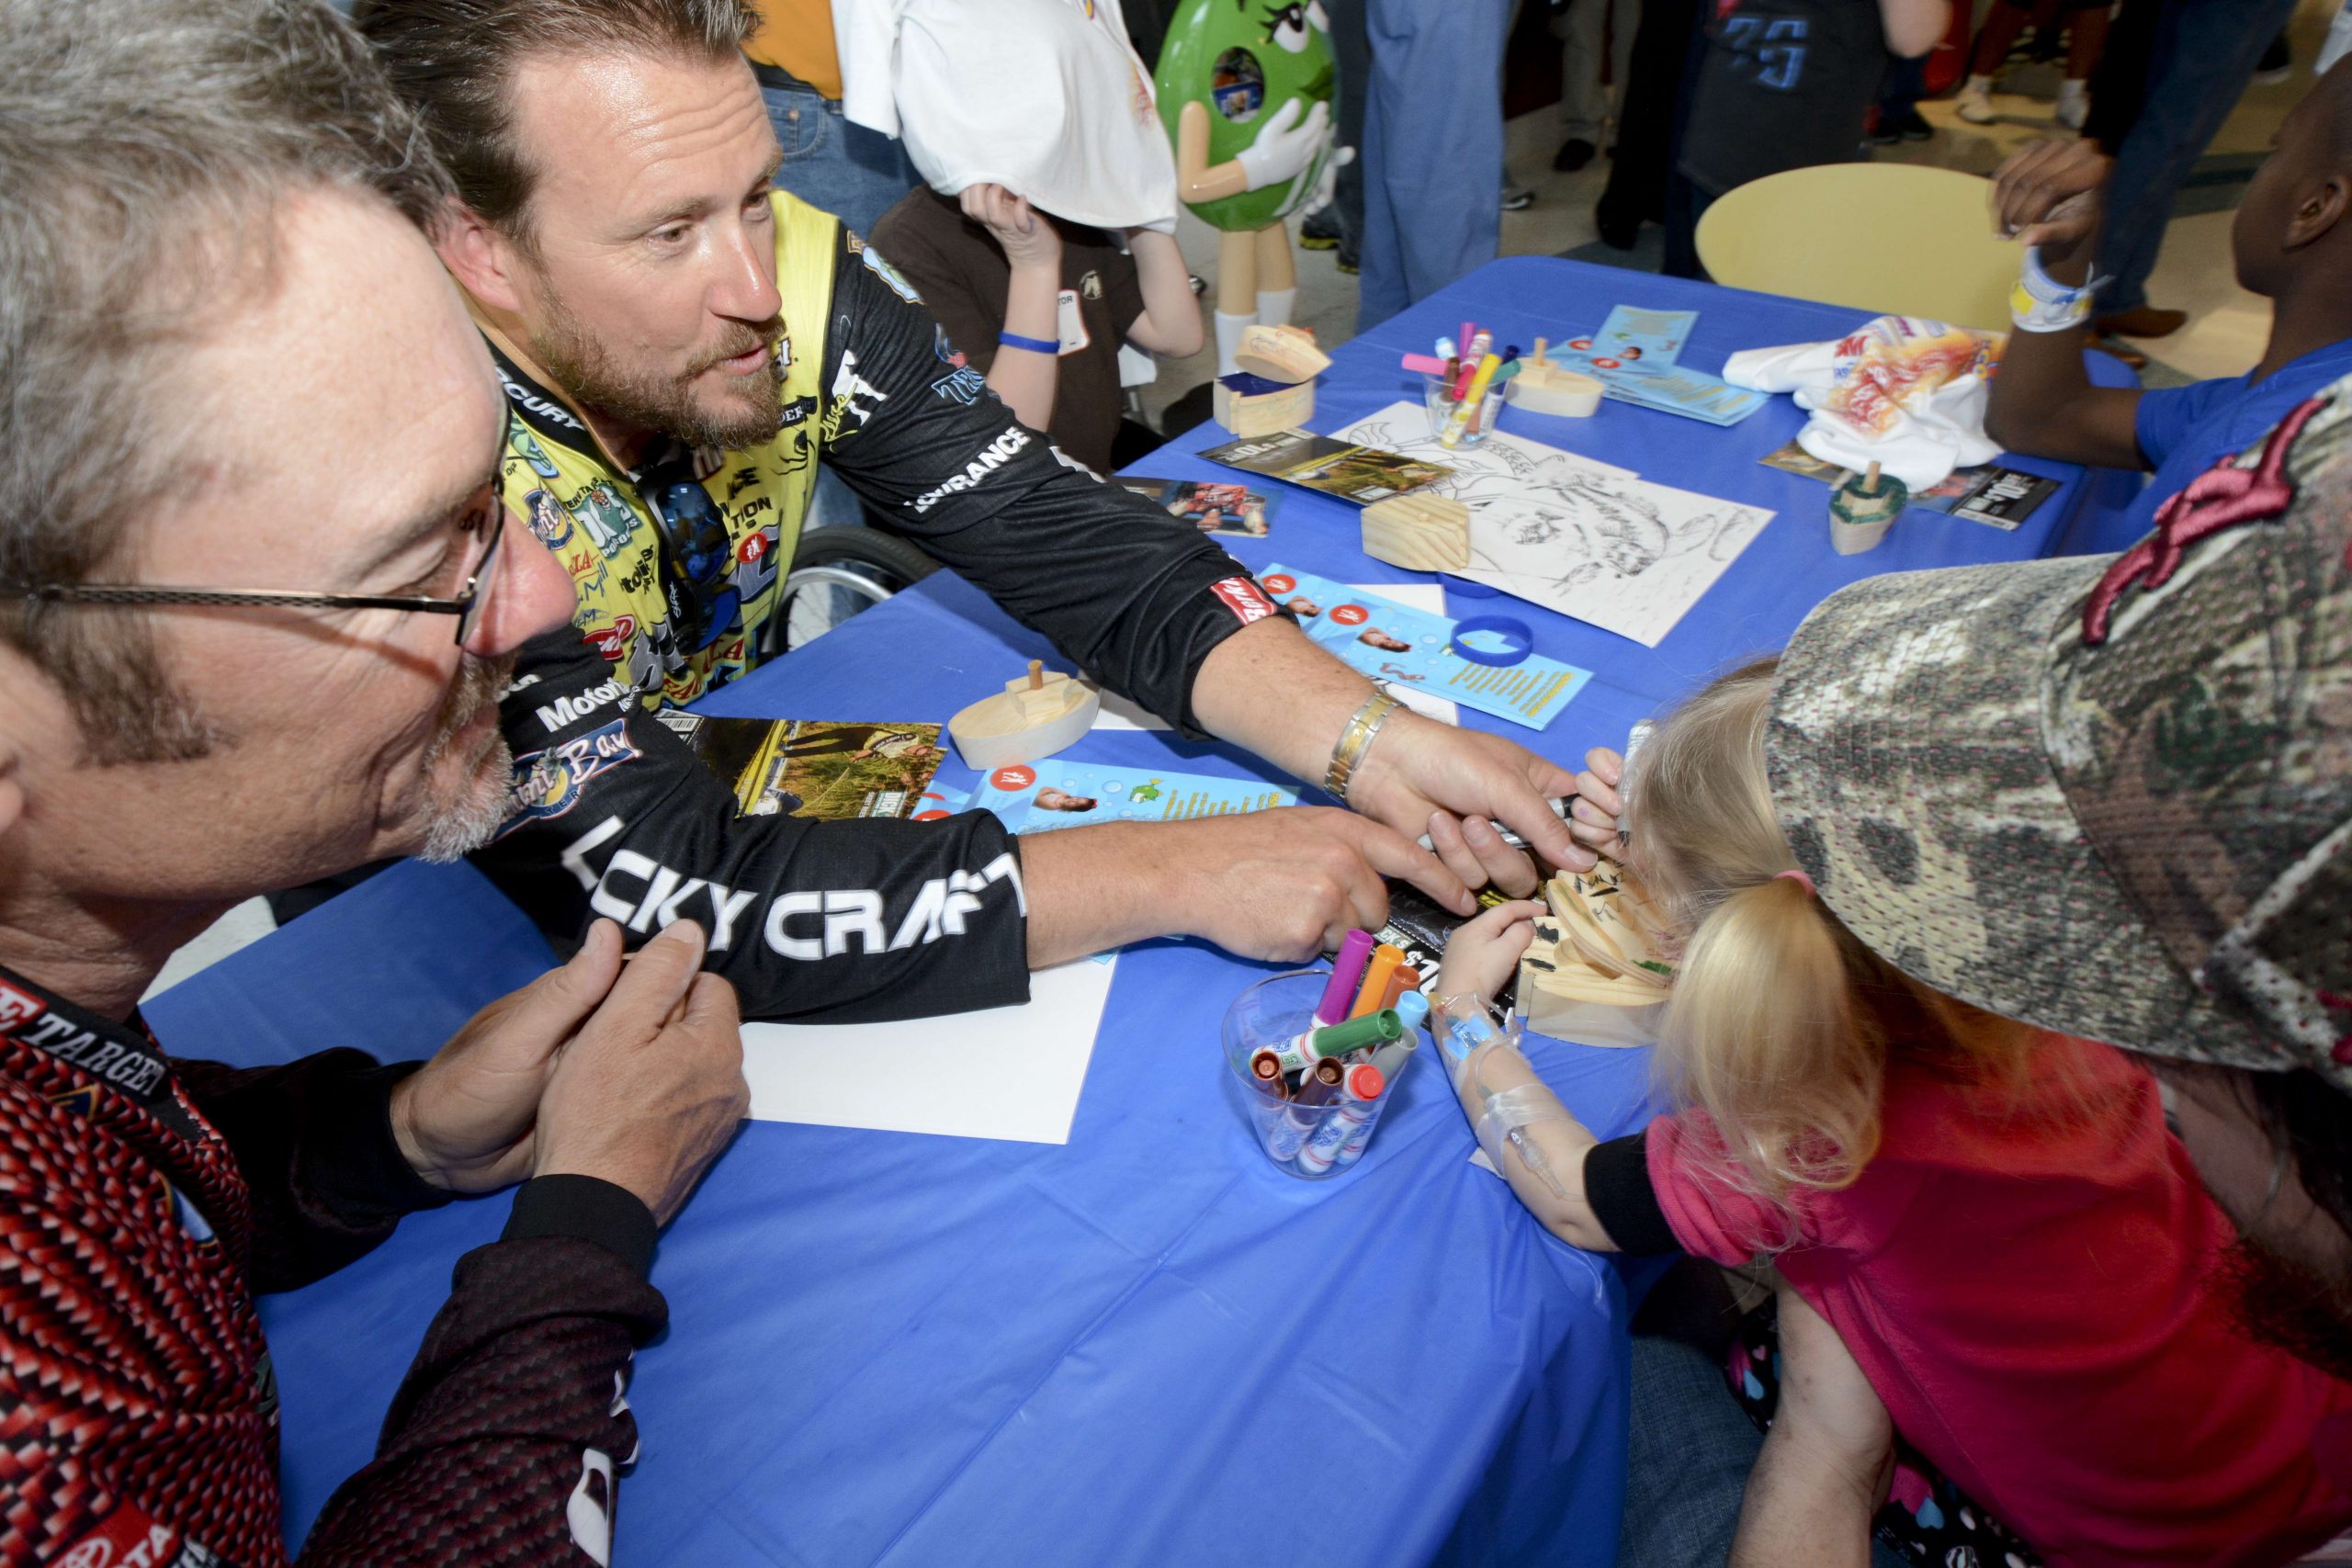 Reese and Browning look closely at their fan's artwork.